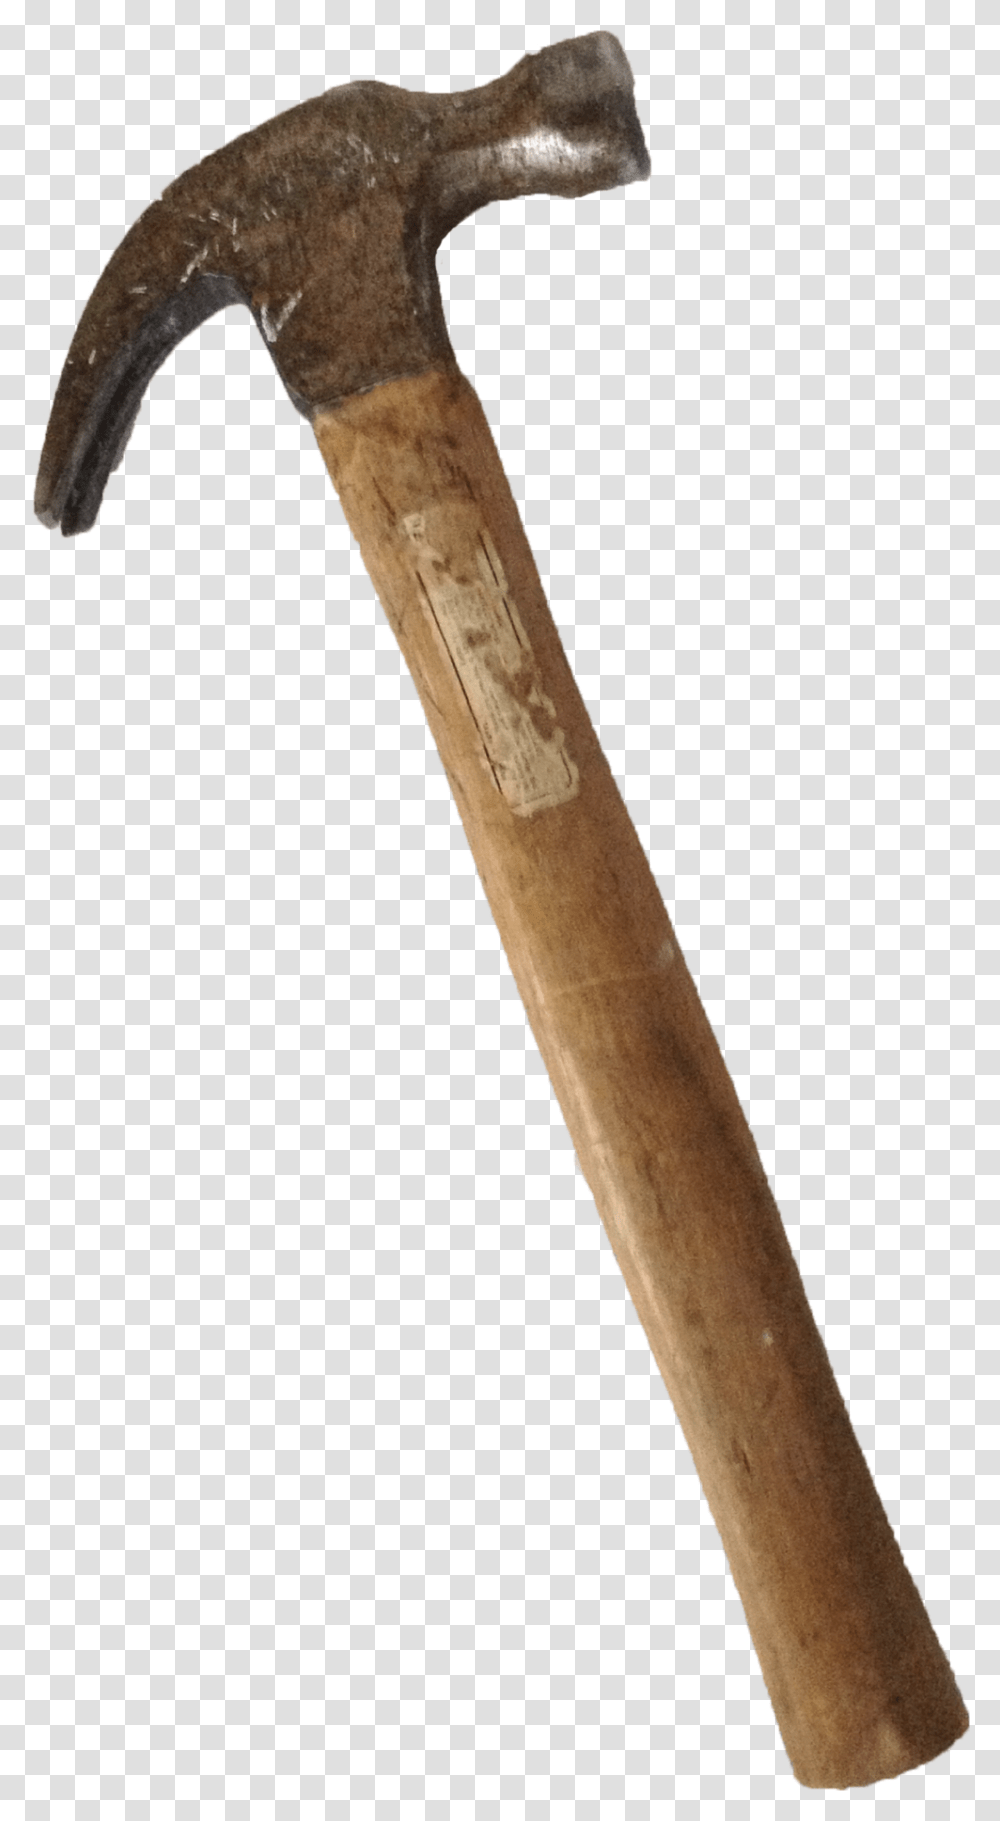 Hammer Free Download Background Hammer, Axe, Tool, Mallet Transparent Png